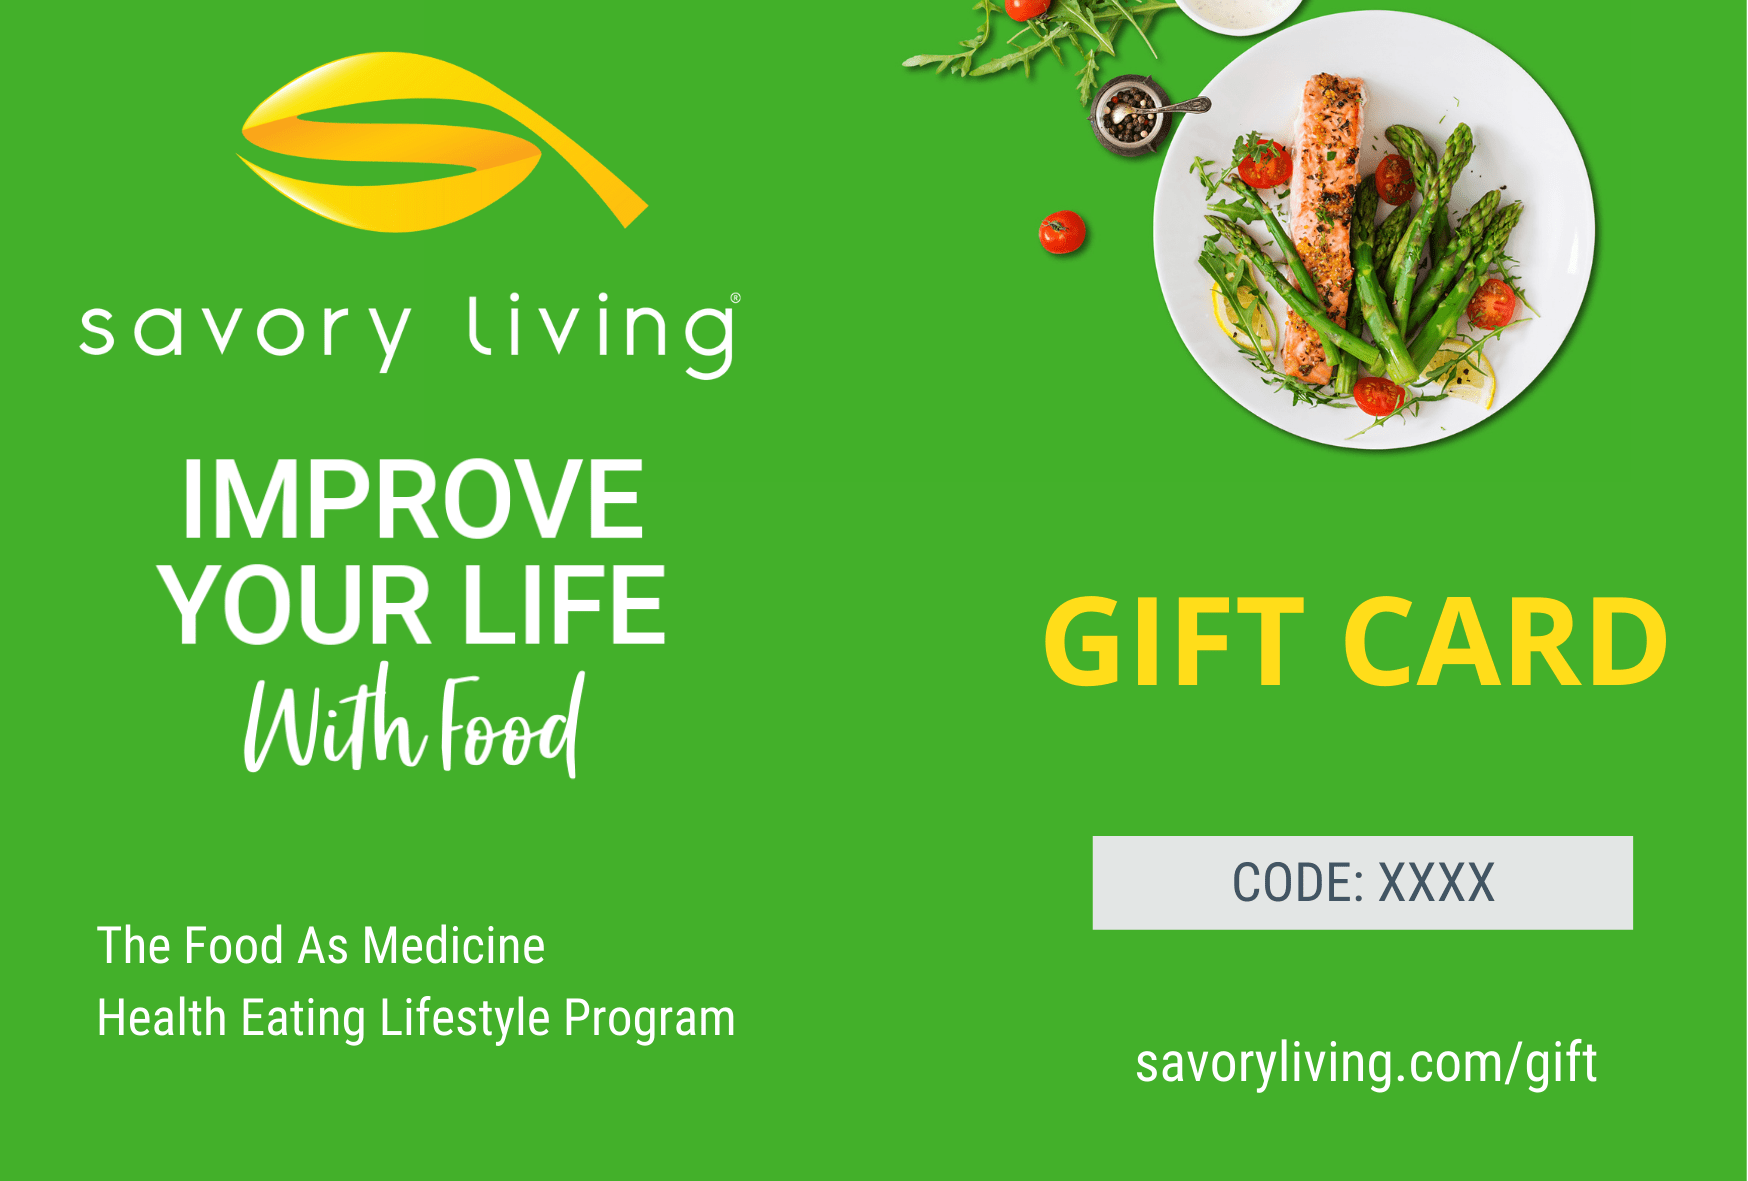 Savory Living Gift Card General 12.13.21